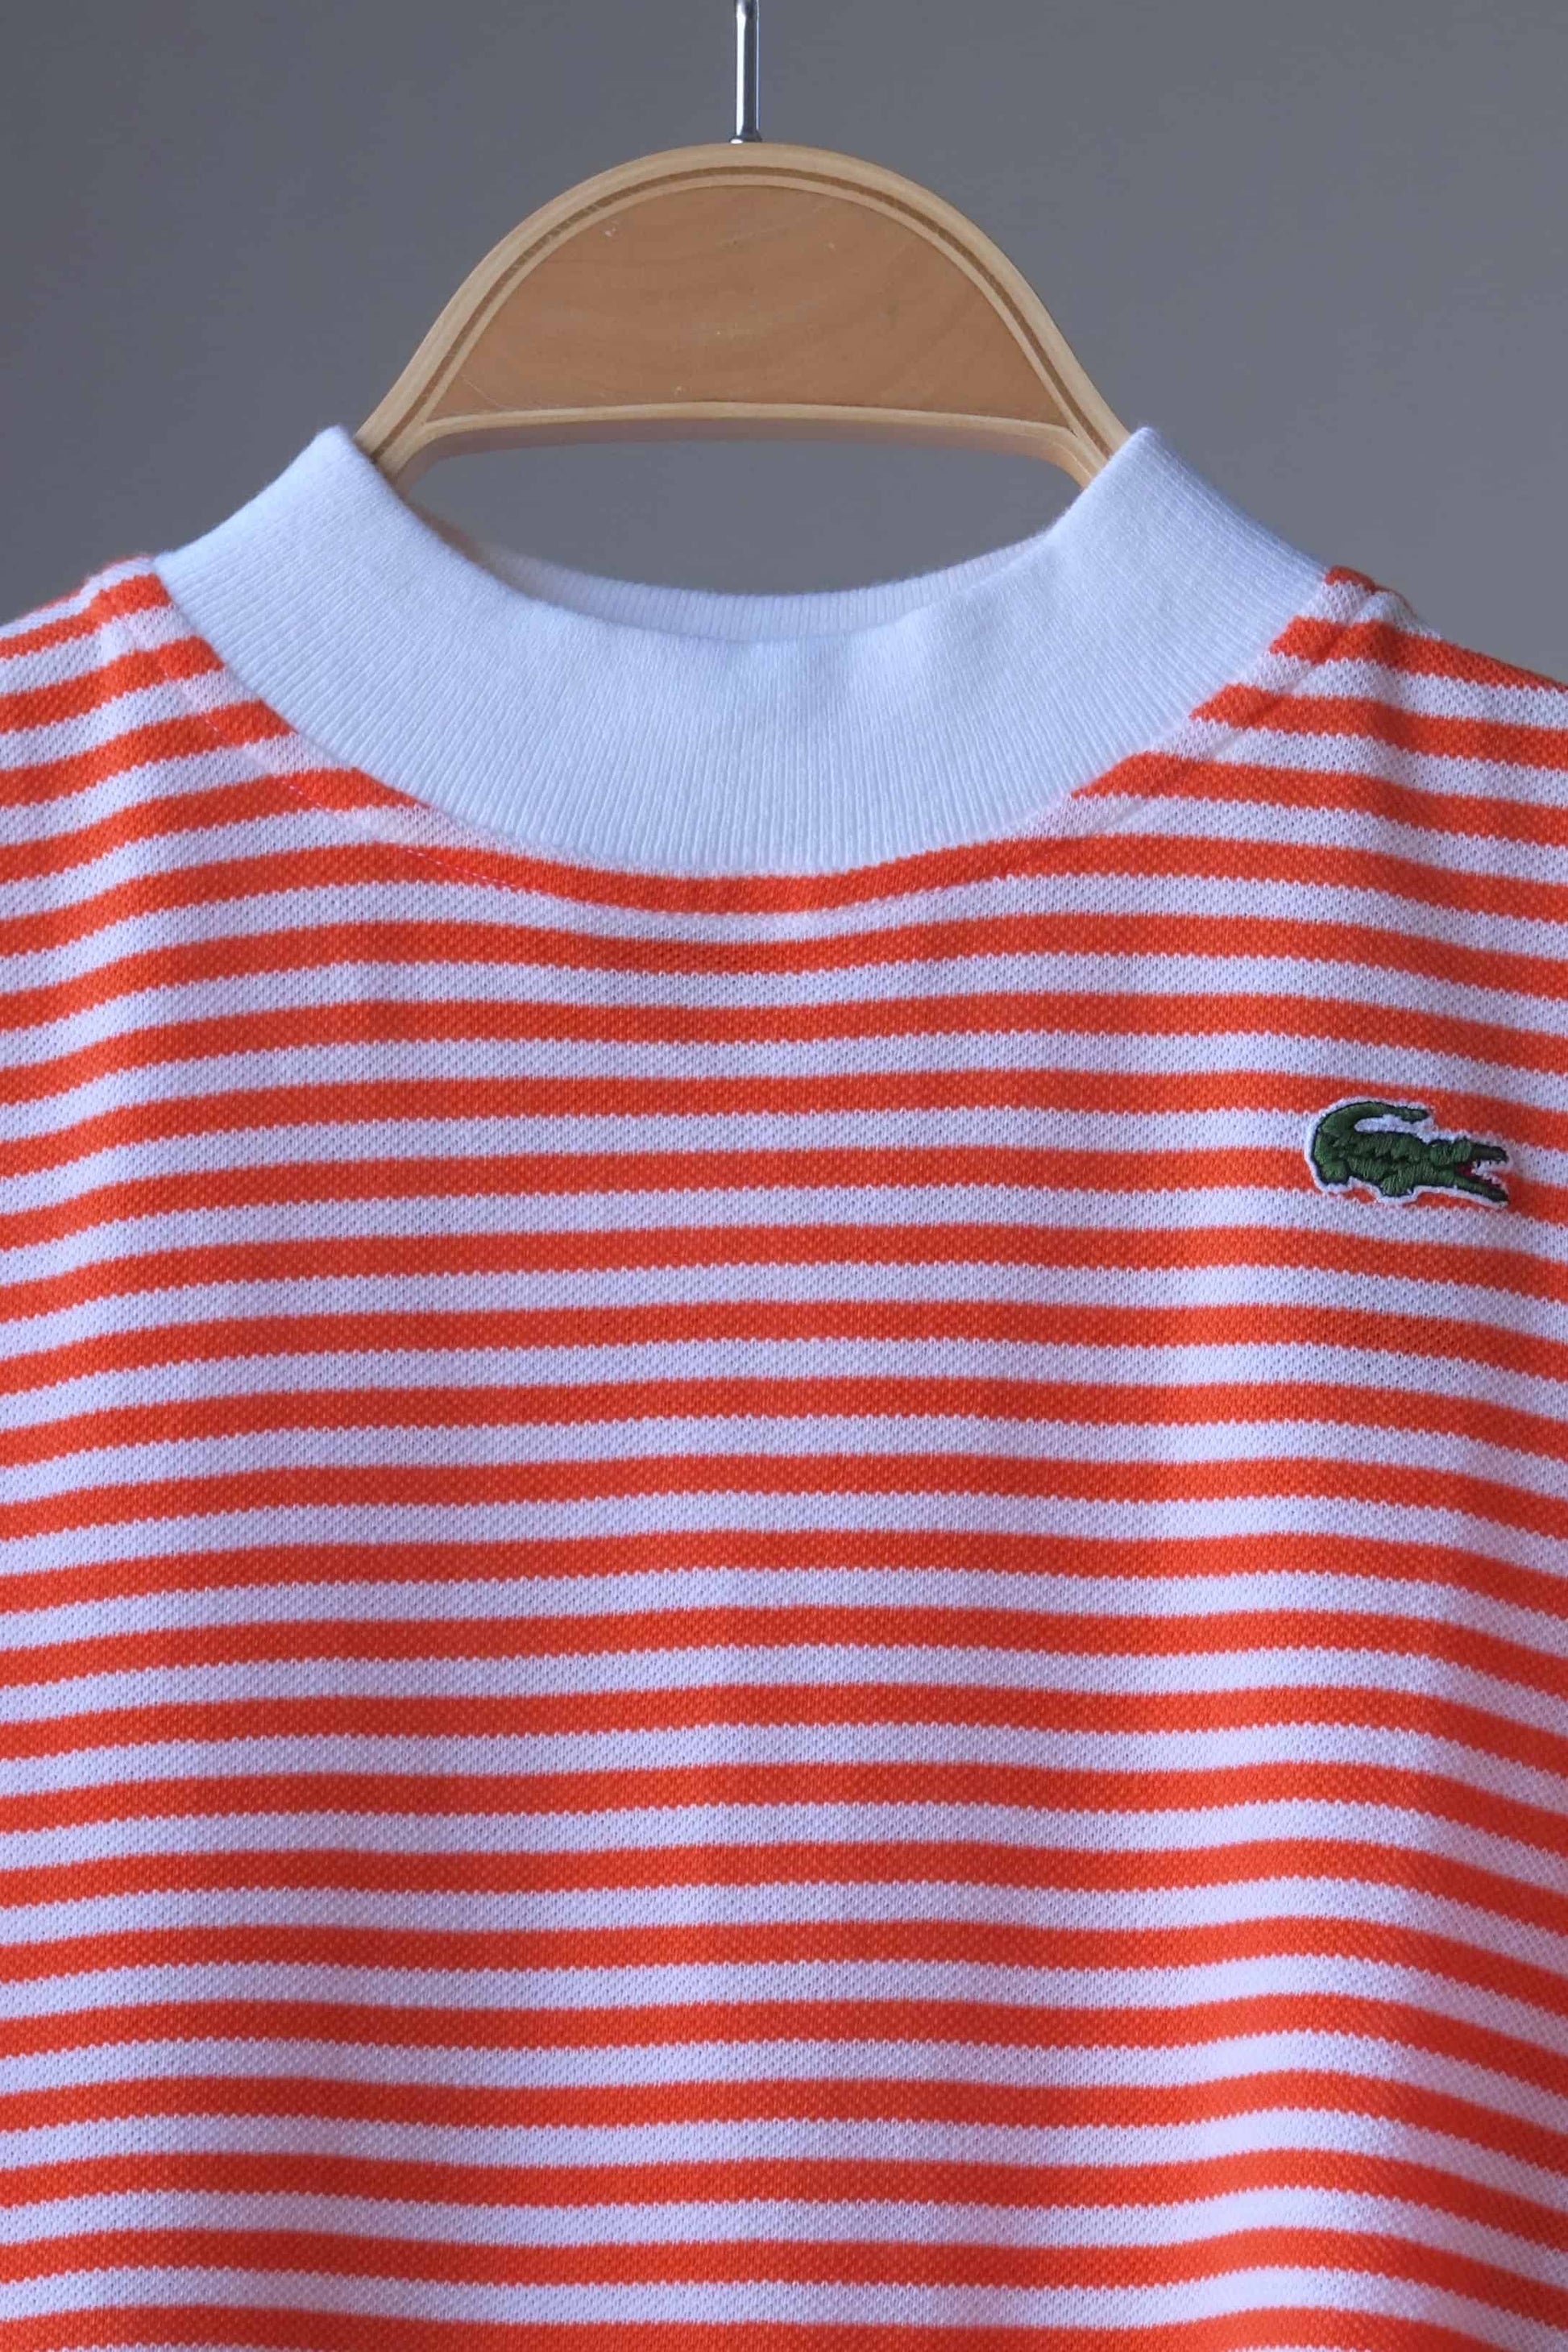 close up of LACOSTE Striped Shirt in orange and white